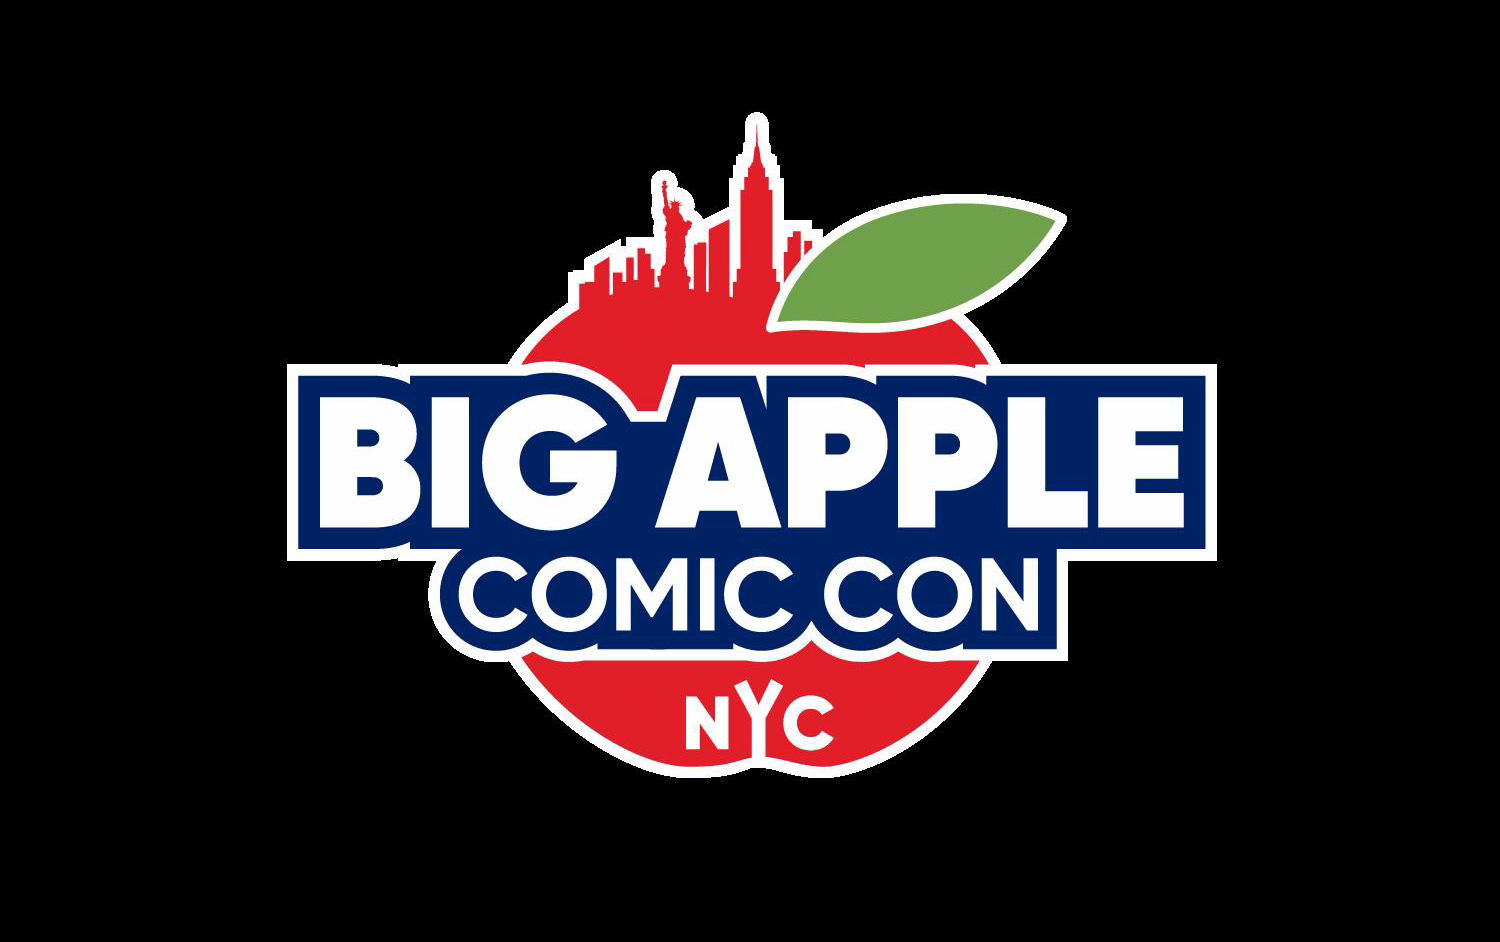 Getting To The Core Of Big Apple Con!